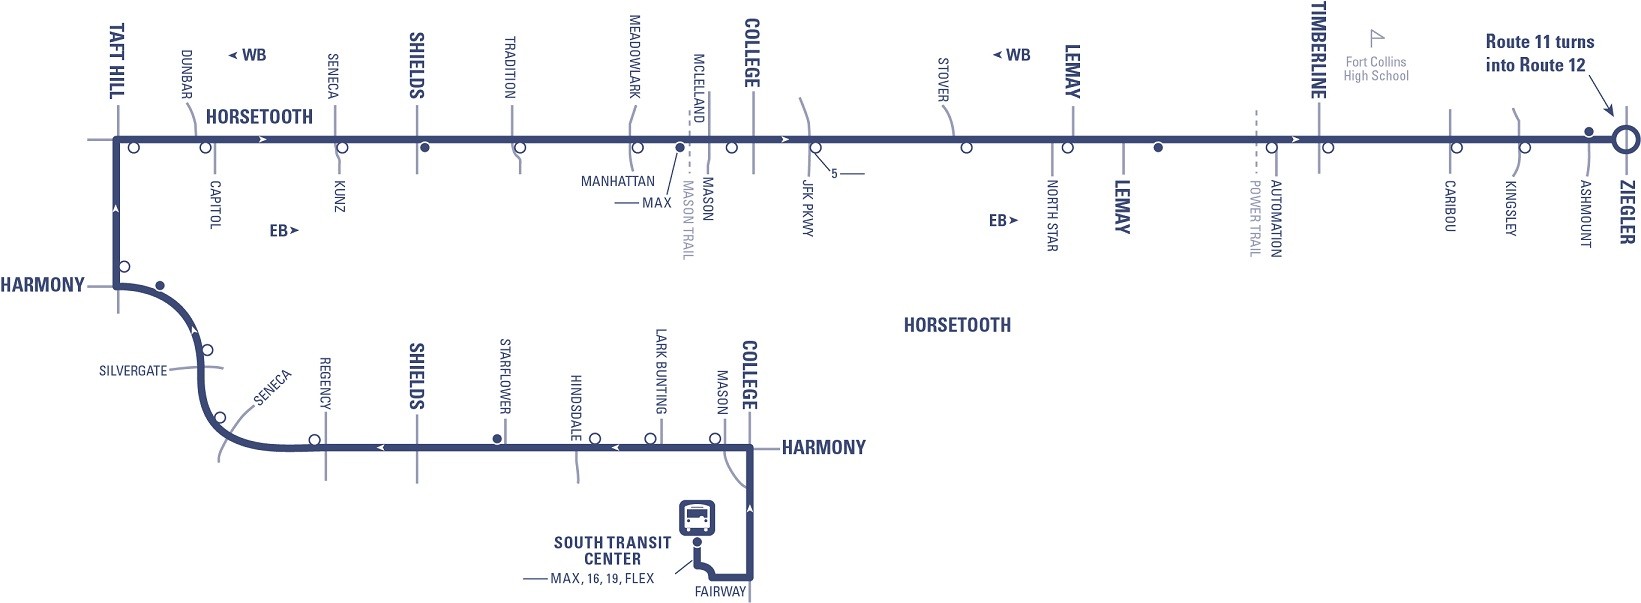 Route 11 - South Transit Center to Horsetooth and Ziegler via Harmony, Taft Hill, and Horsetooth